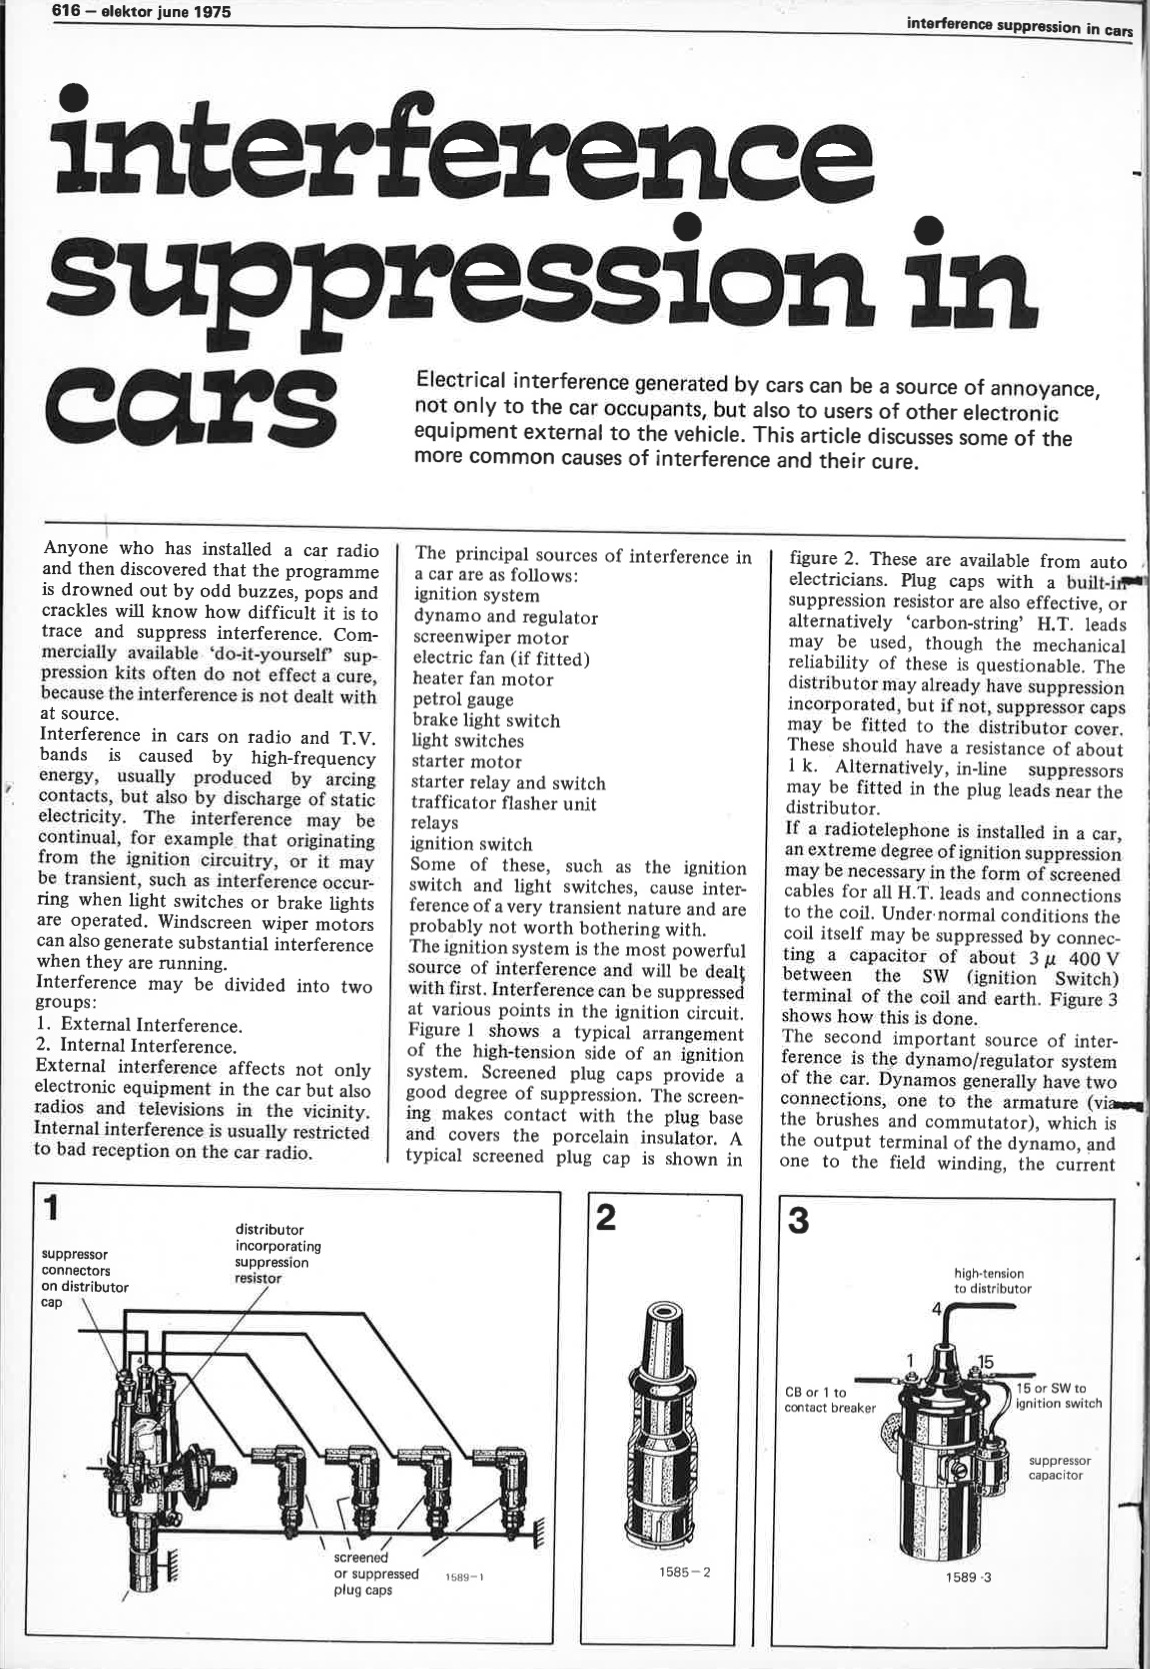 interference suppression in cars